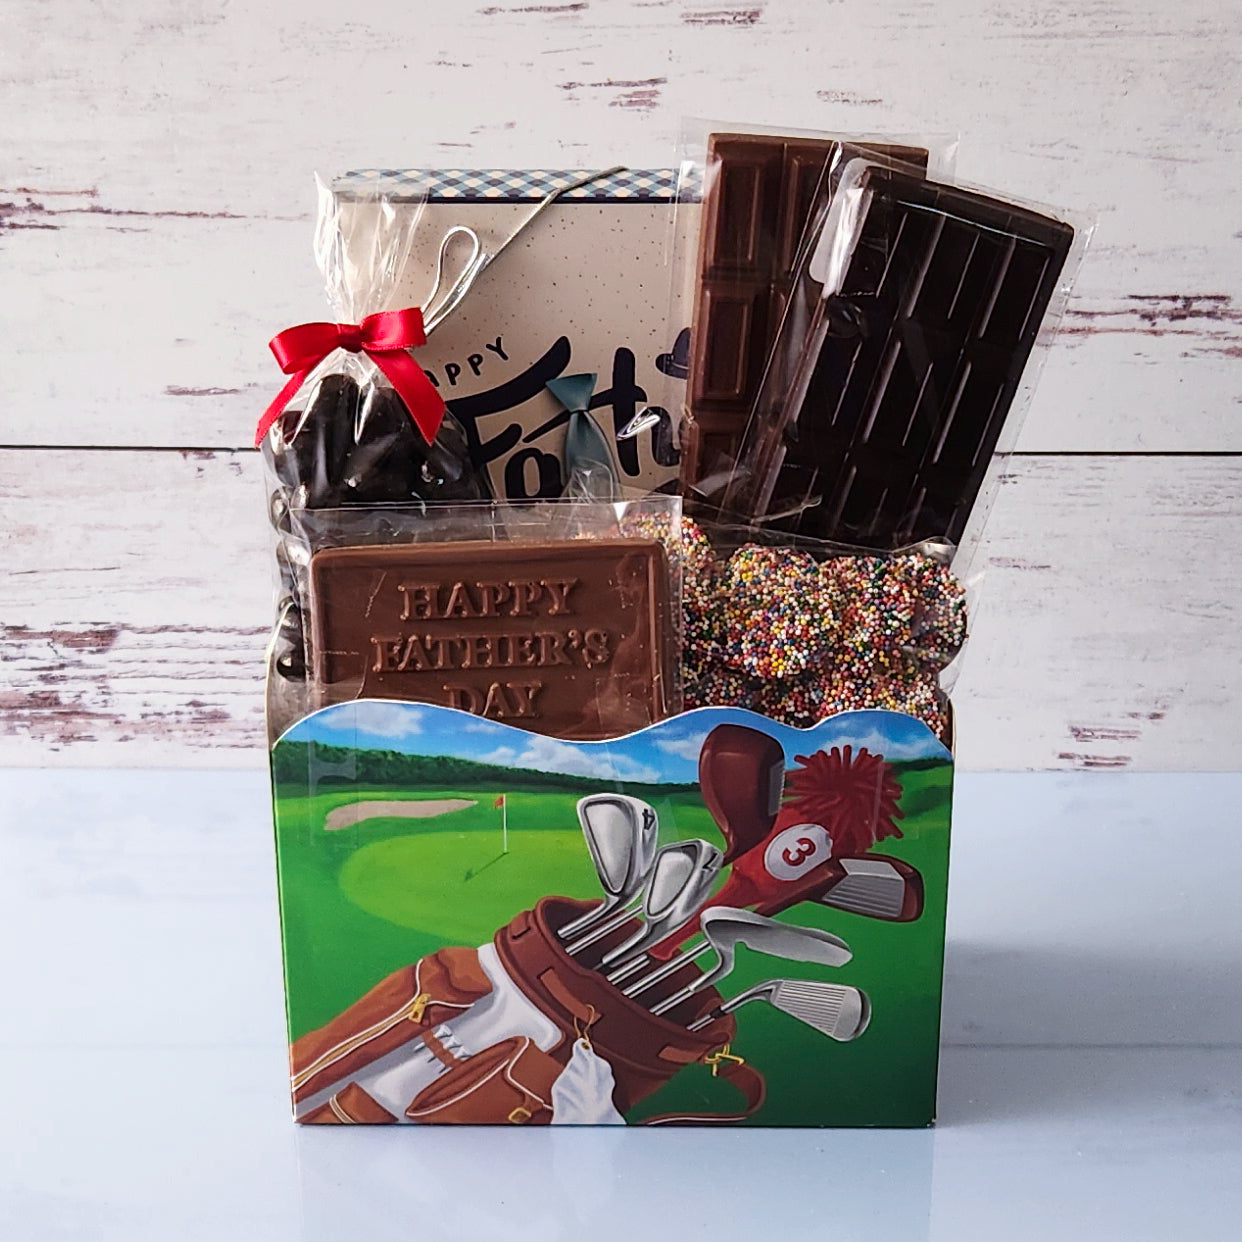 This golf style basket is filled with all of dads favorite candy. From Chocolate bars, to nonpareils and even chocolate covered cranberries fill this basket.